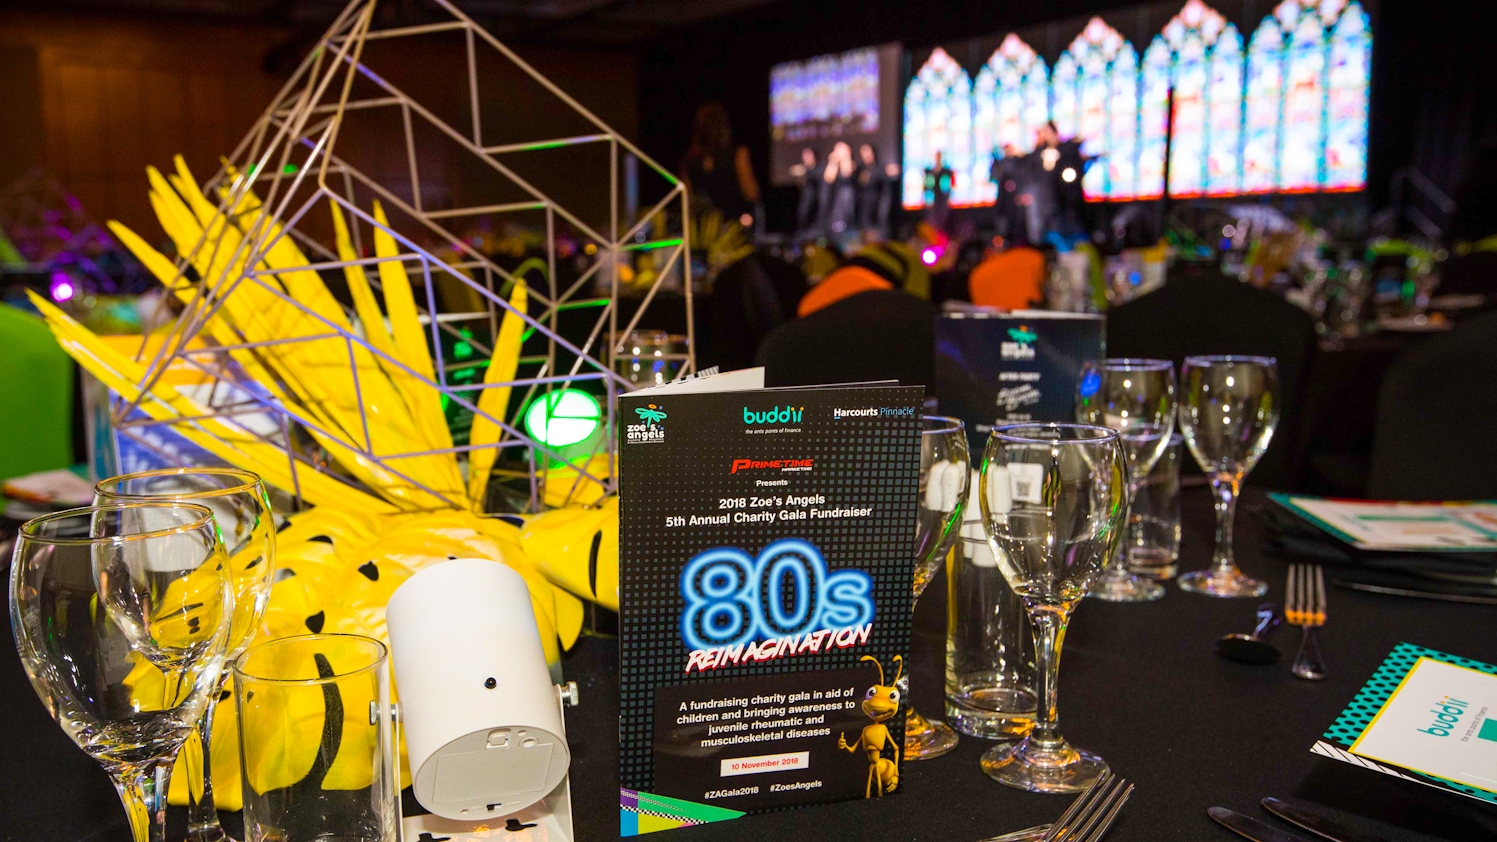 80s Theme Charity Fundraising Gala for Zoe's Angels Charity captured by Brisbane Event Photographer